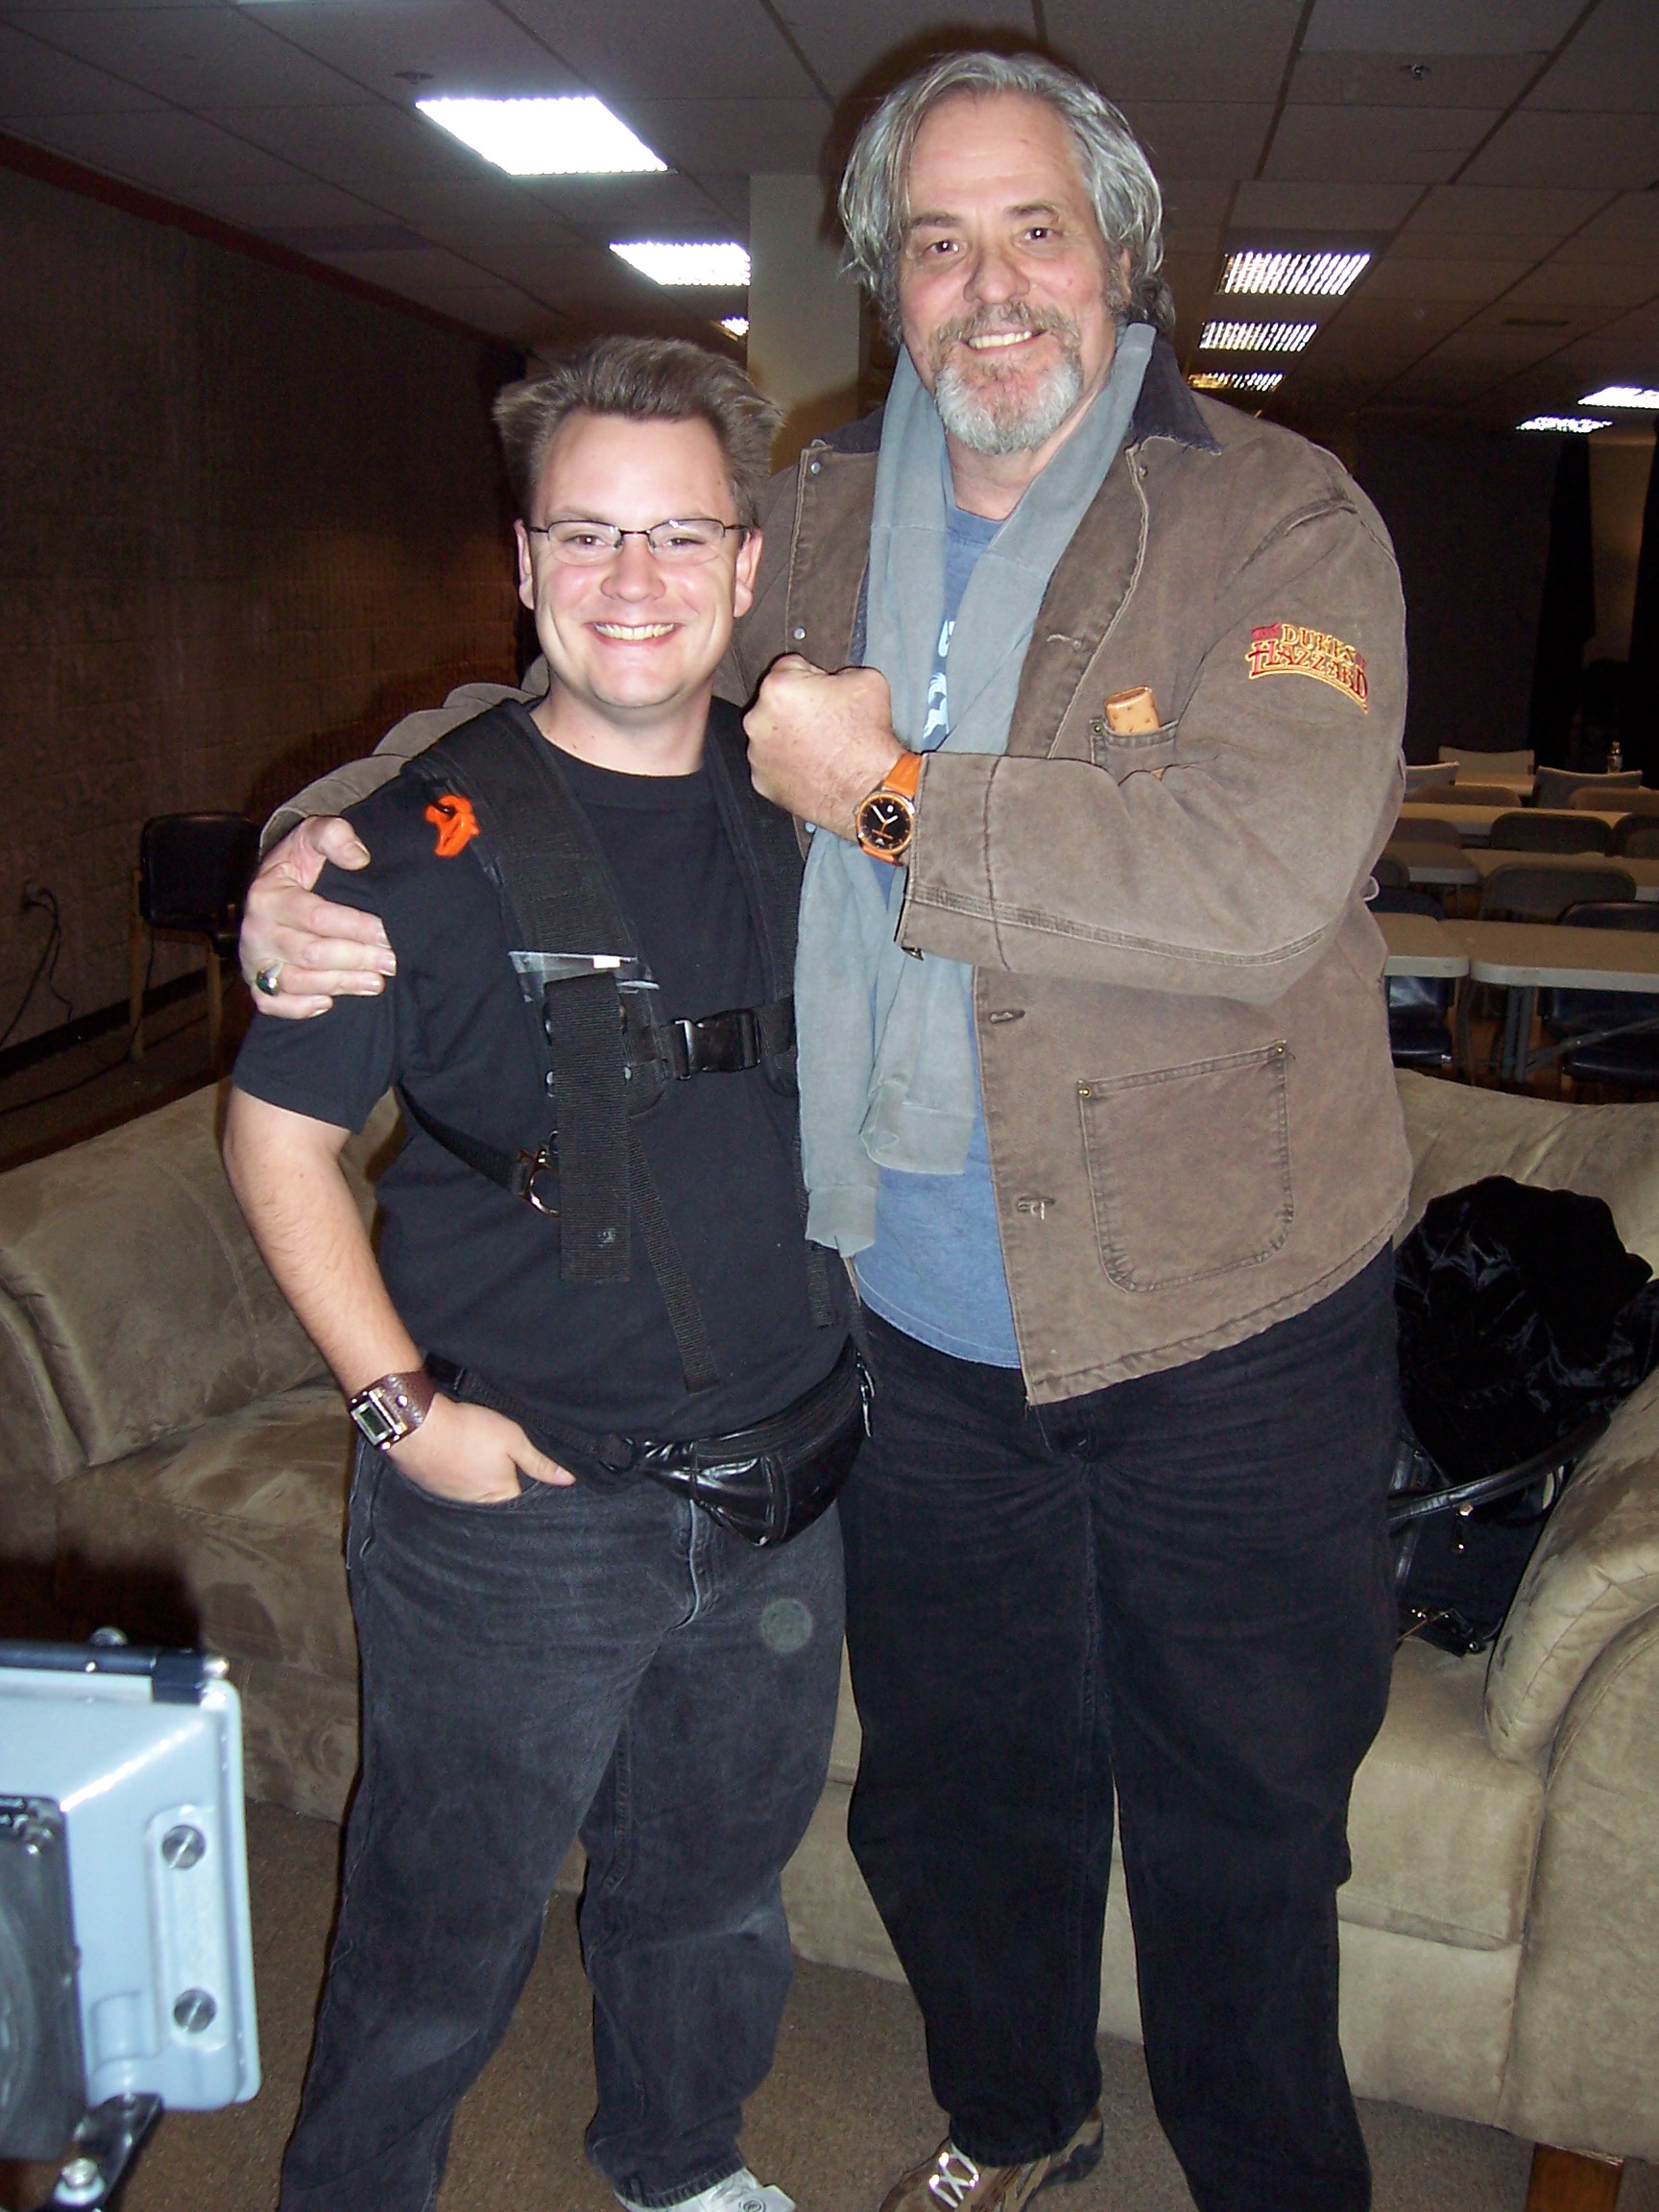 Me and M.C. Gainey shooting Behind the Scenes of 